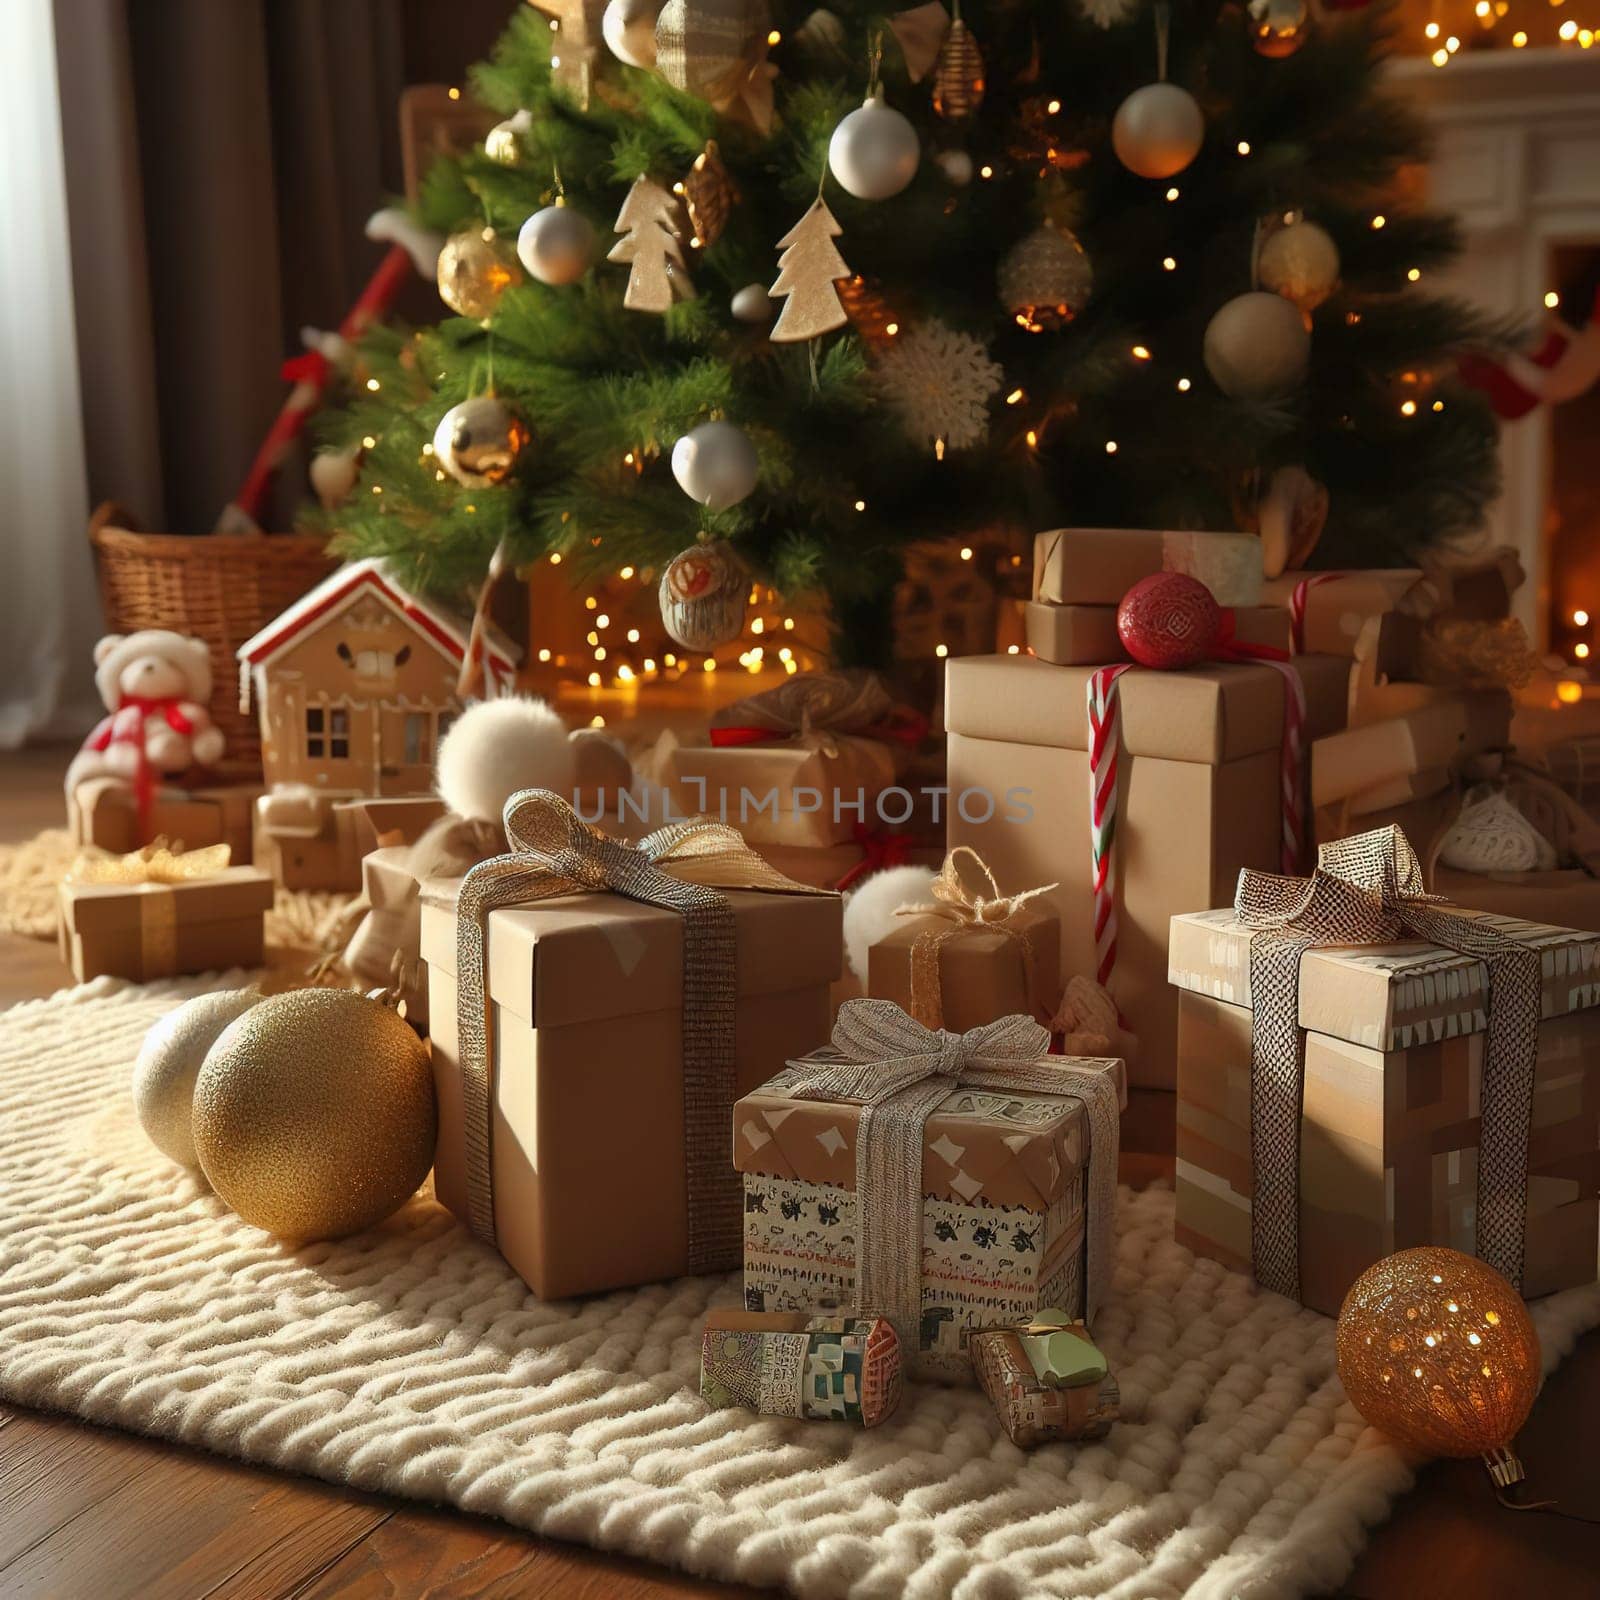 Beautiful luxurious Christmas gifts on floor in room with Christmas tree, closeup